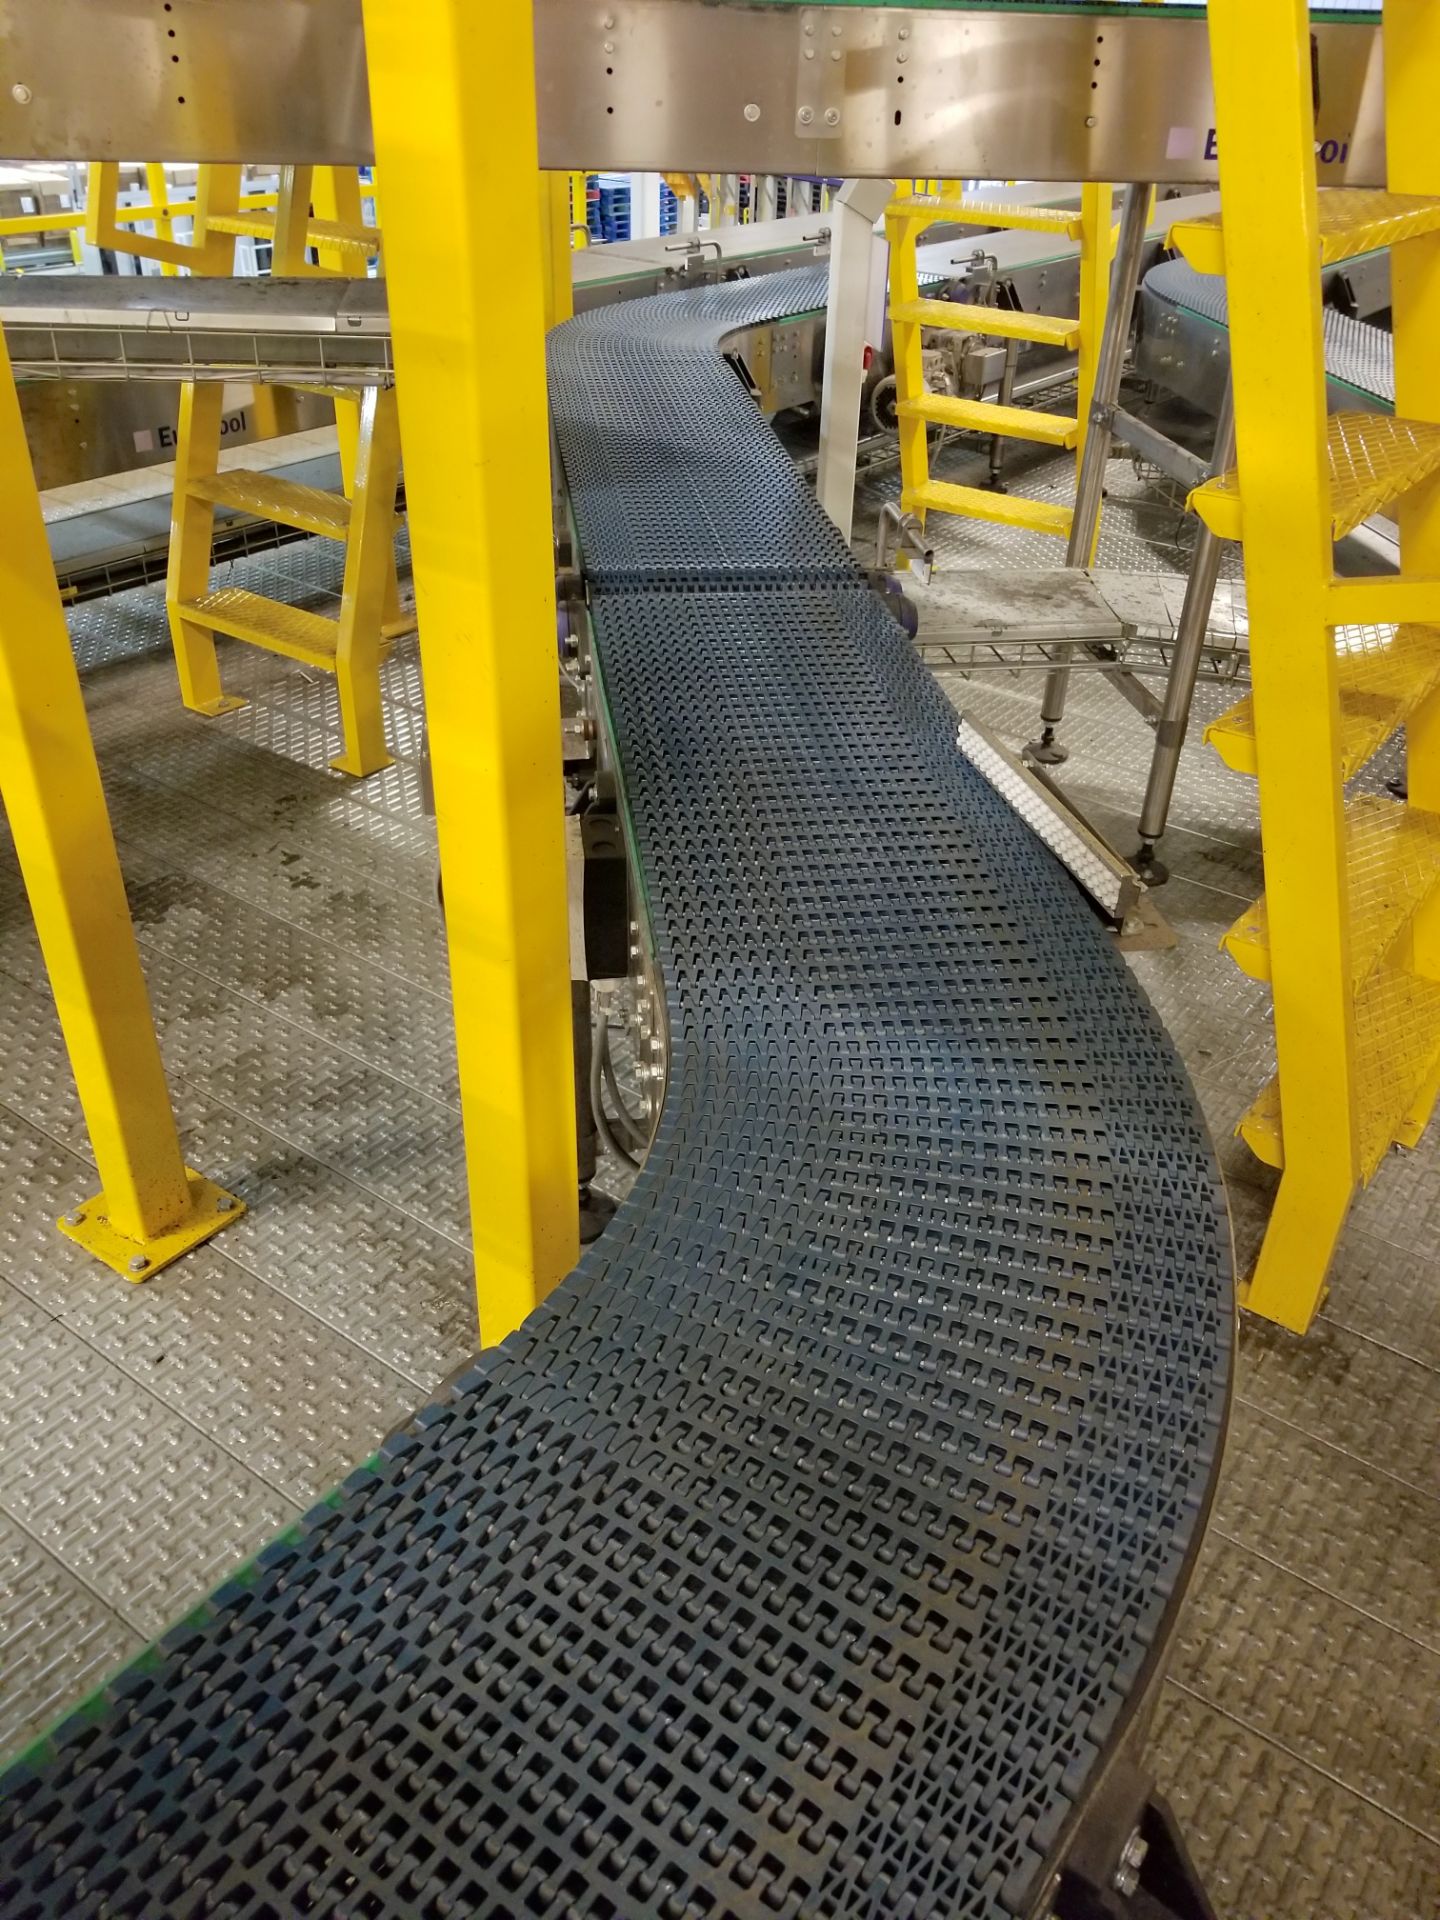 Approx. 40 feet of Europool Case Conveyor - Discharge of Case Switch - Image 3 of 7